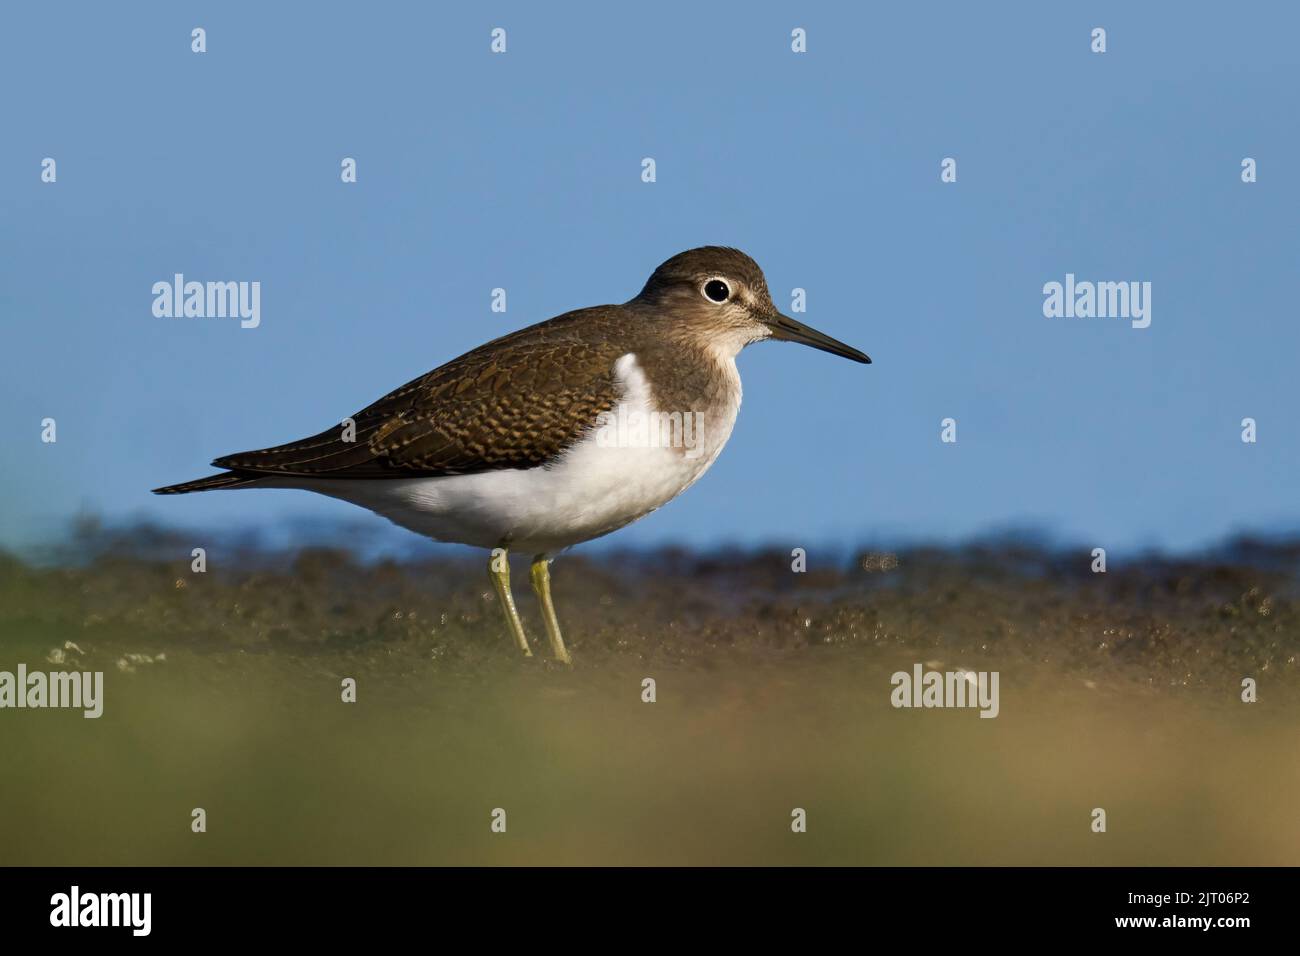 Common sandpiper (Actitis hypoleucos) in its natural environment Stock Photo